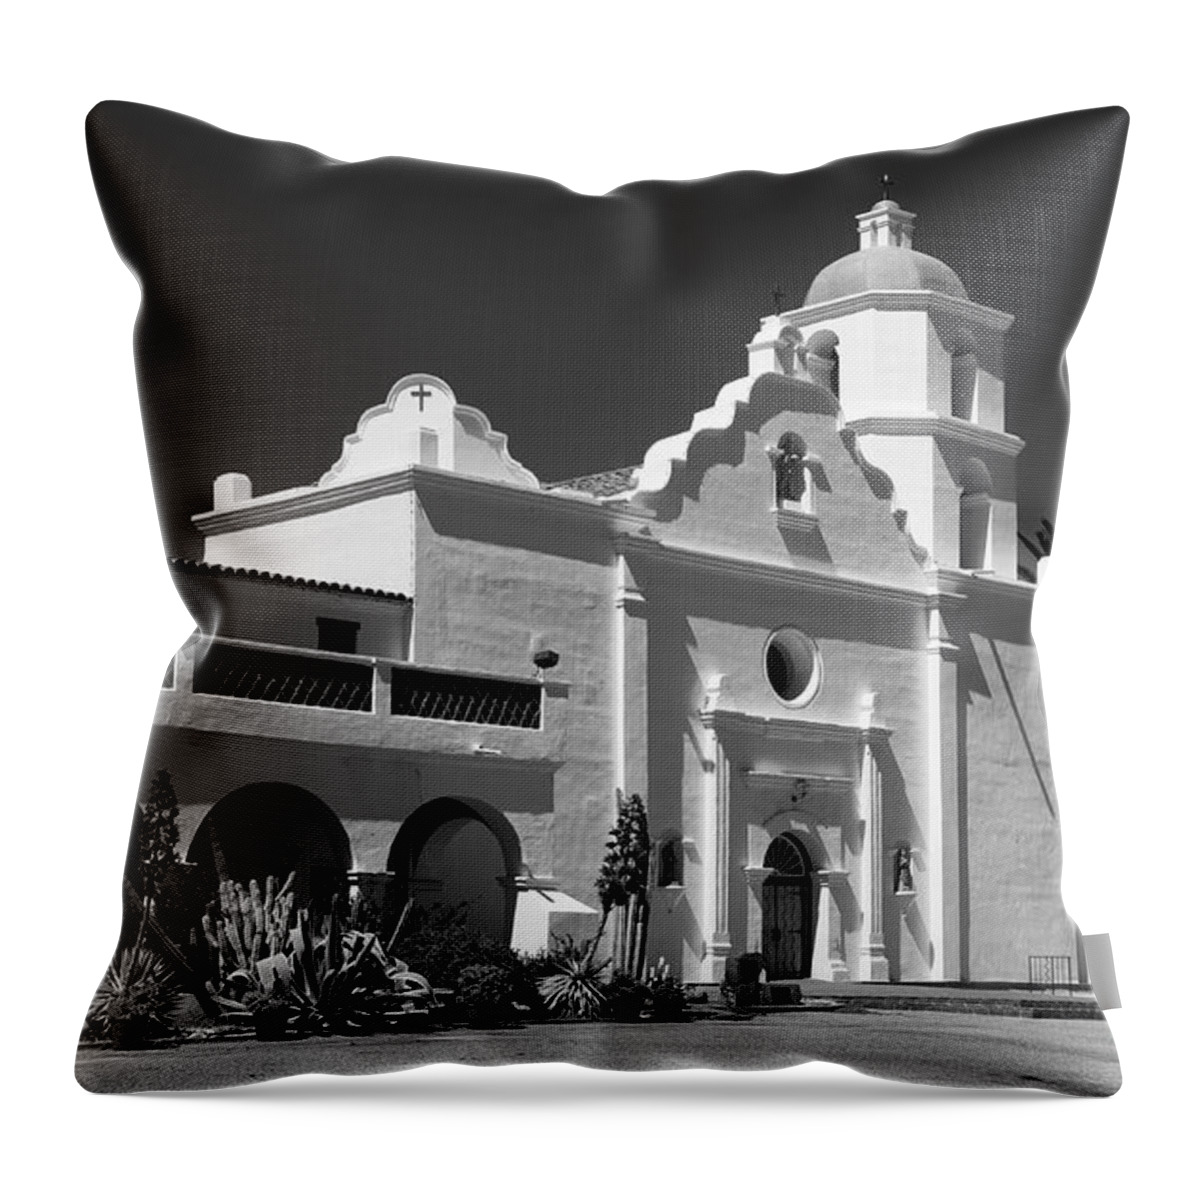 Black & White Throw Pillow featuring the photograph Morning At San Luis Rey Mission by Sandra Bronstein